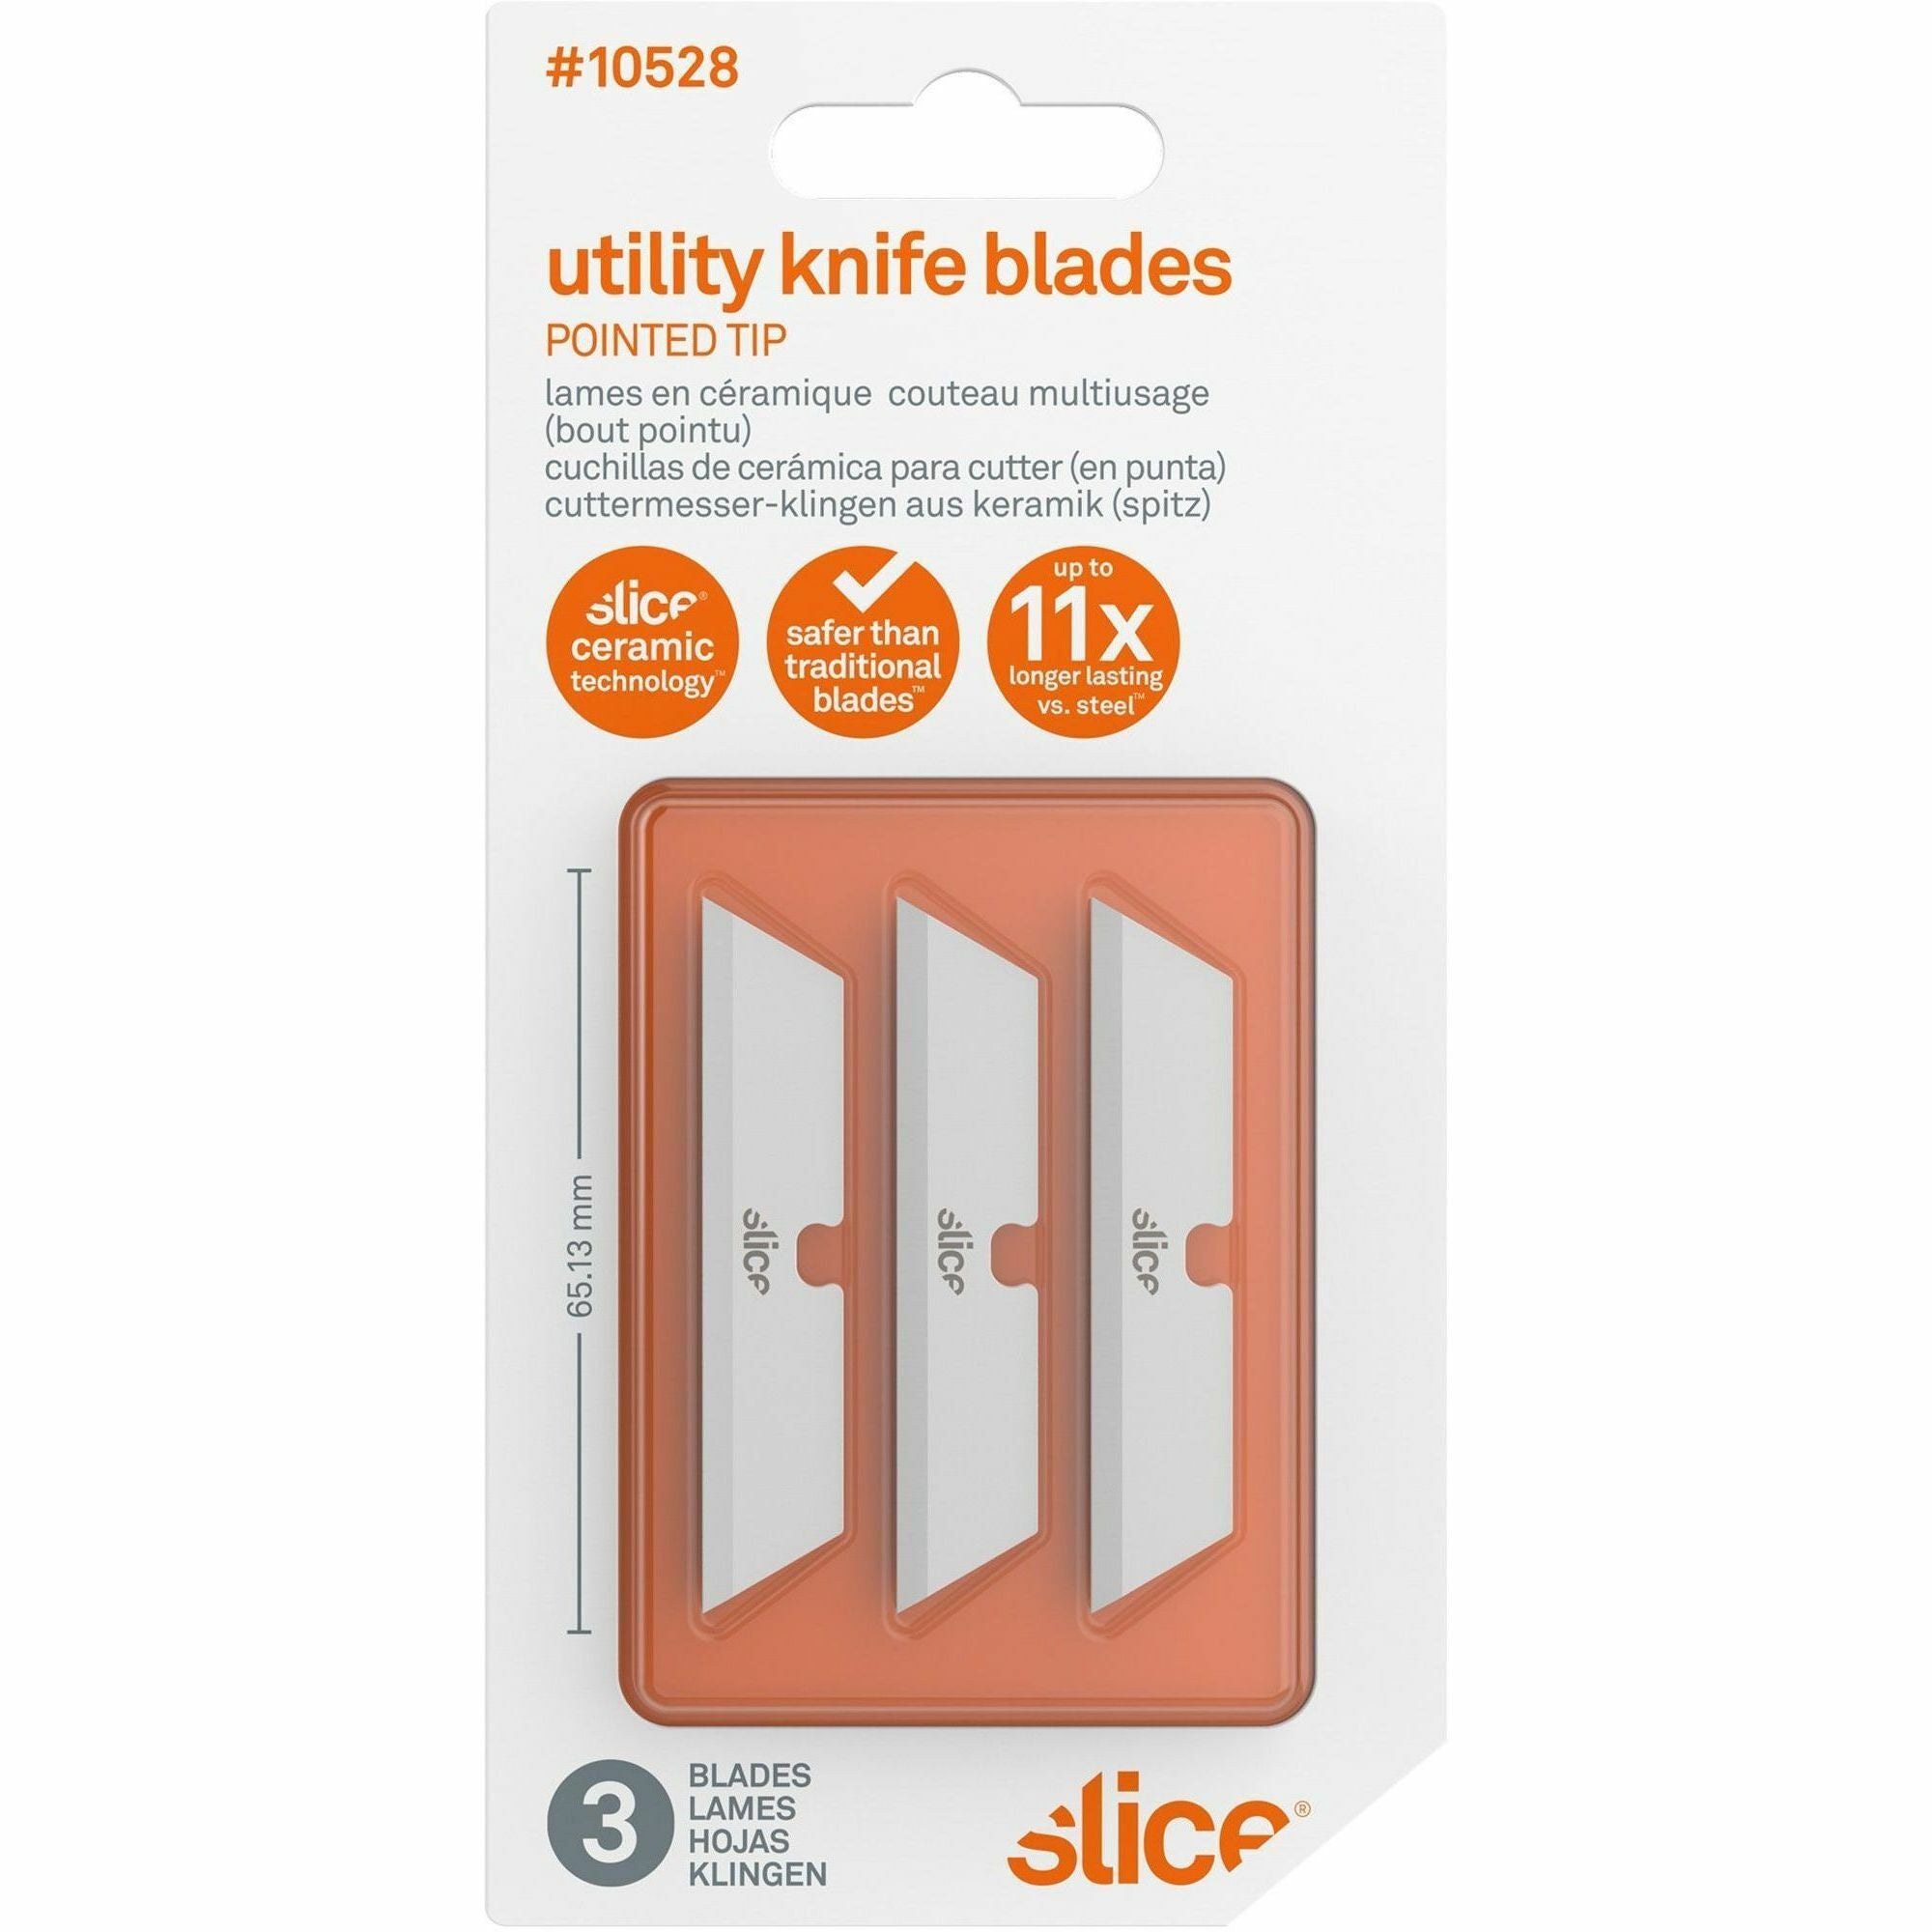 slice-pointed-tip-ceramic-utility-blades-260-length-pointed-tip-non-conductive-non-magnetic-reversible-retractable-rust-resistant-non-sparking-zirconium-oxide-3-pack-white_sli10528 - 1